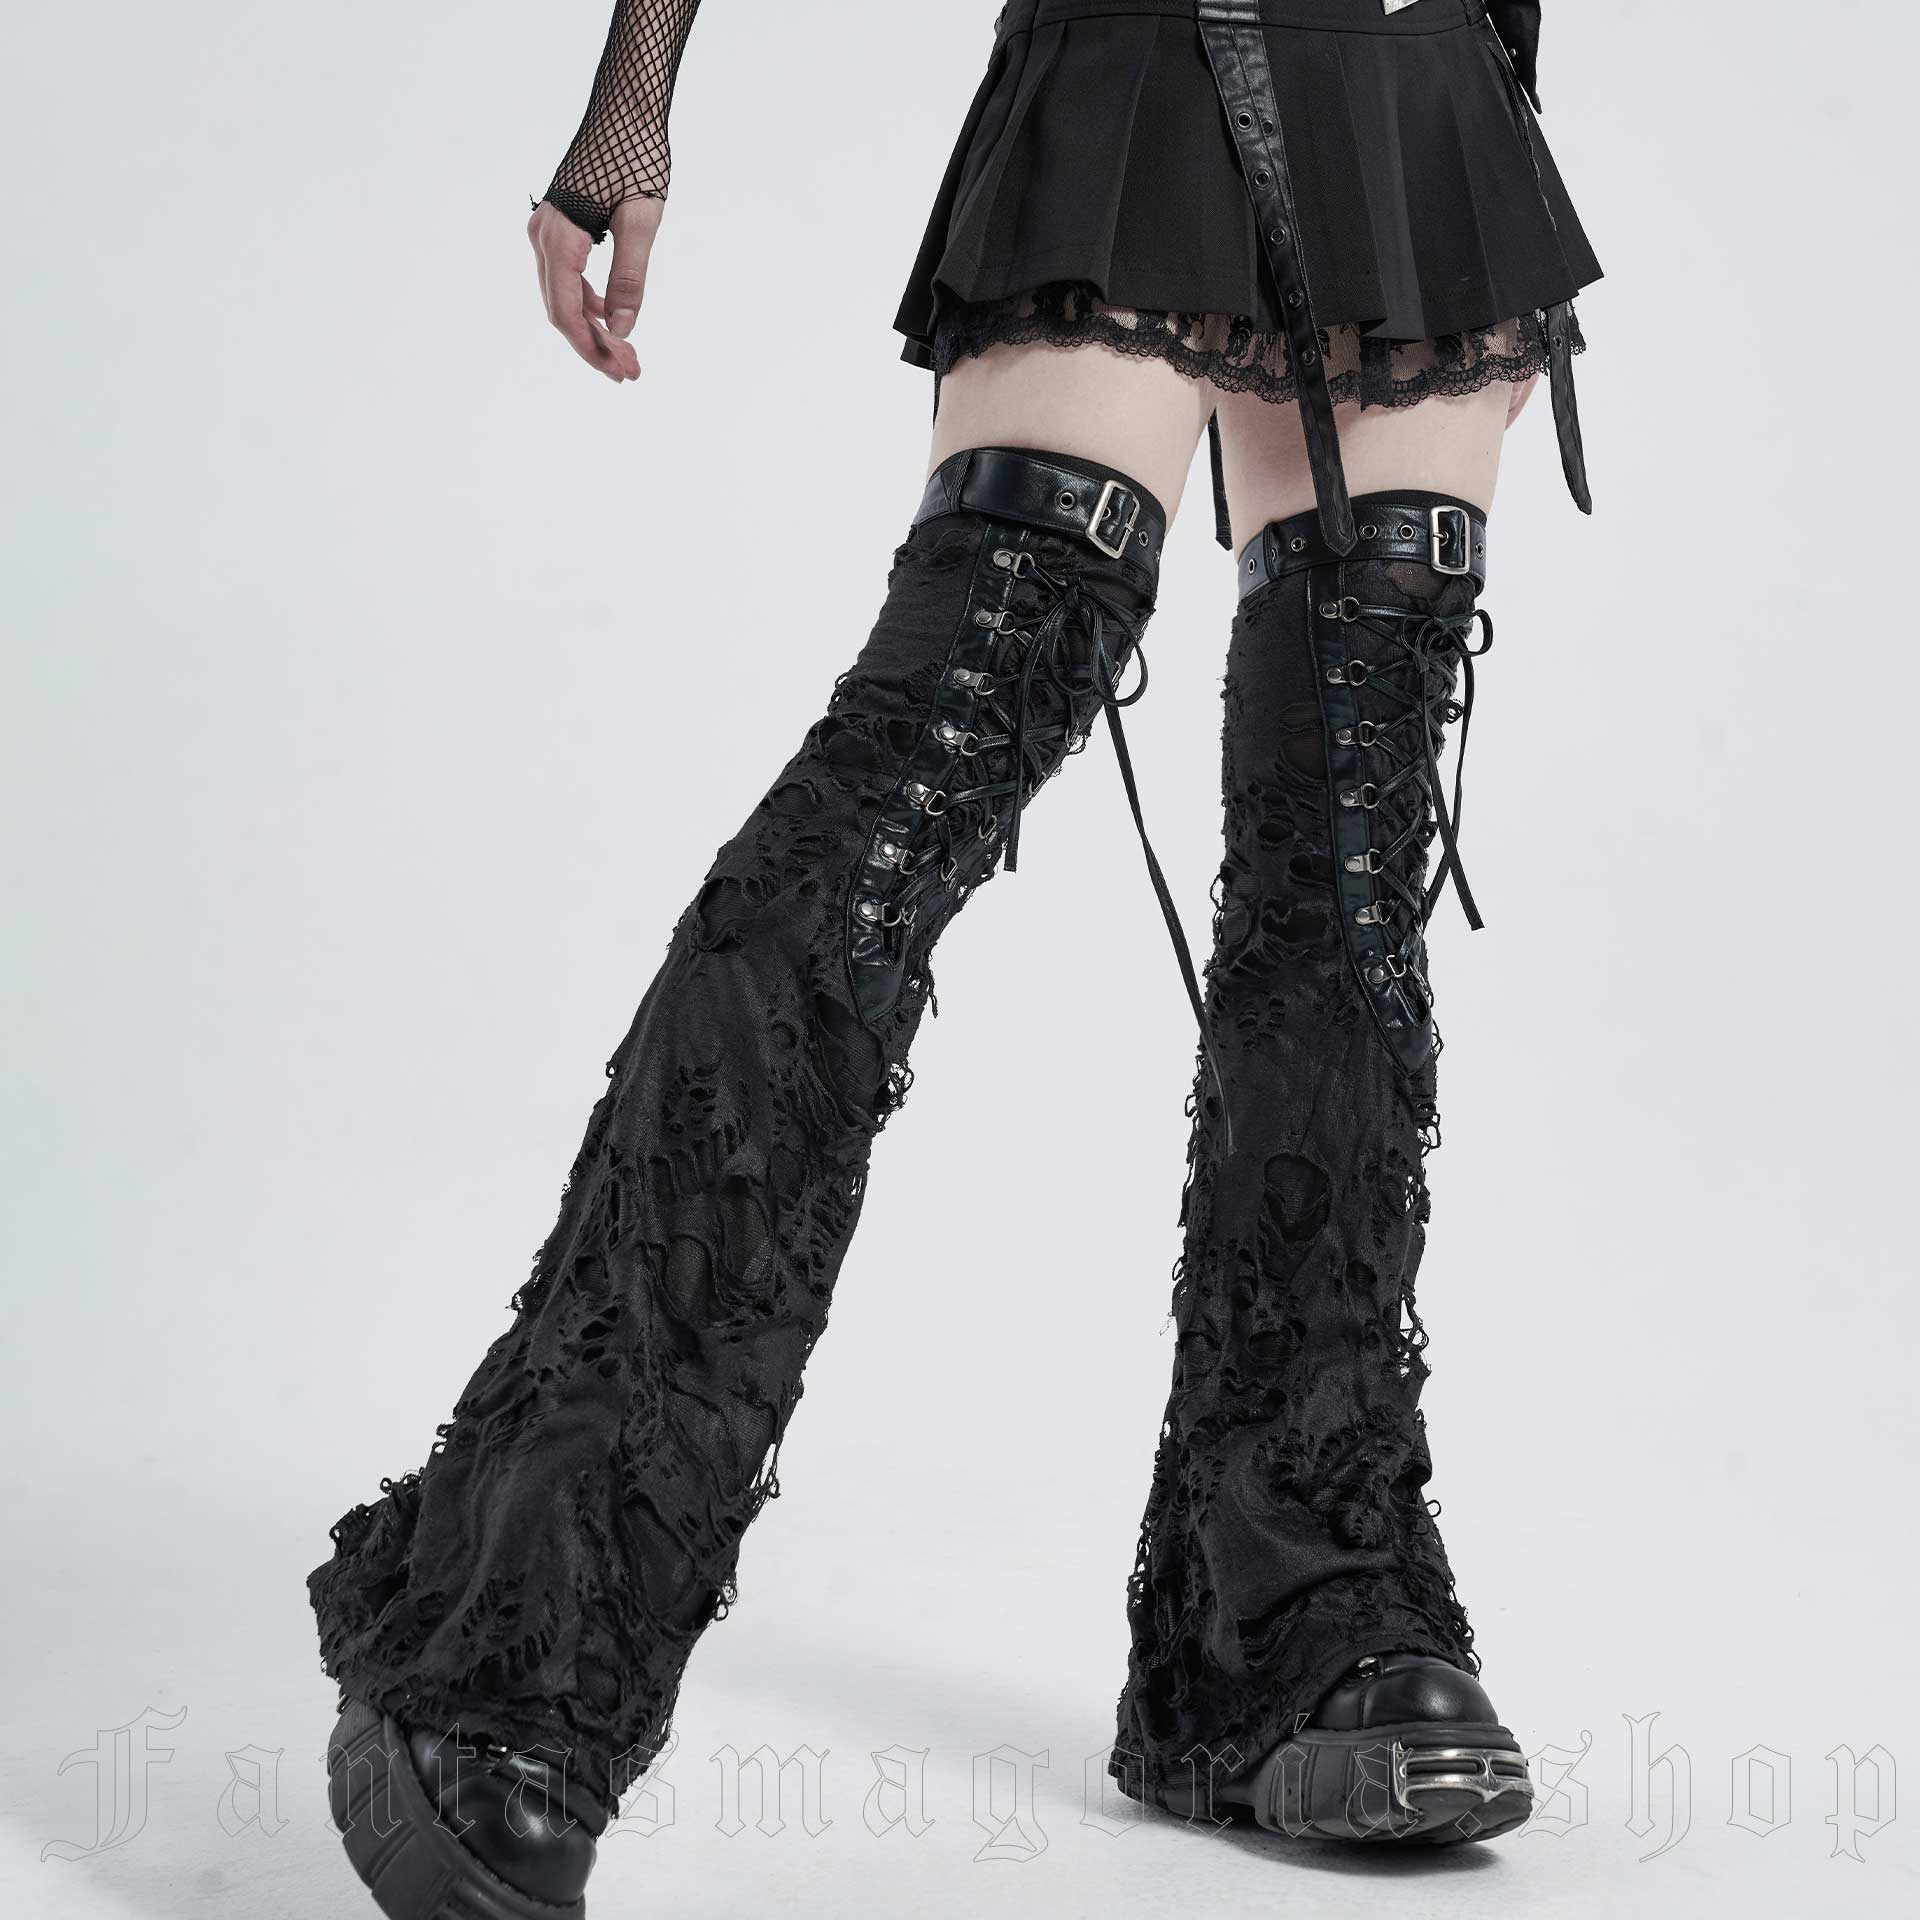 Release the Bats Black Leg Warmers by Punk Rave - Gothic Tights